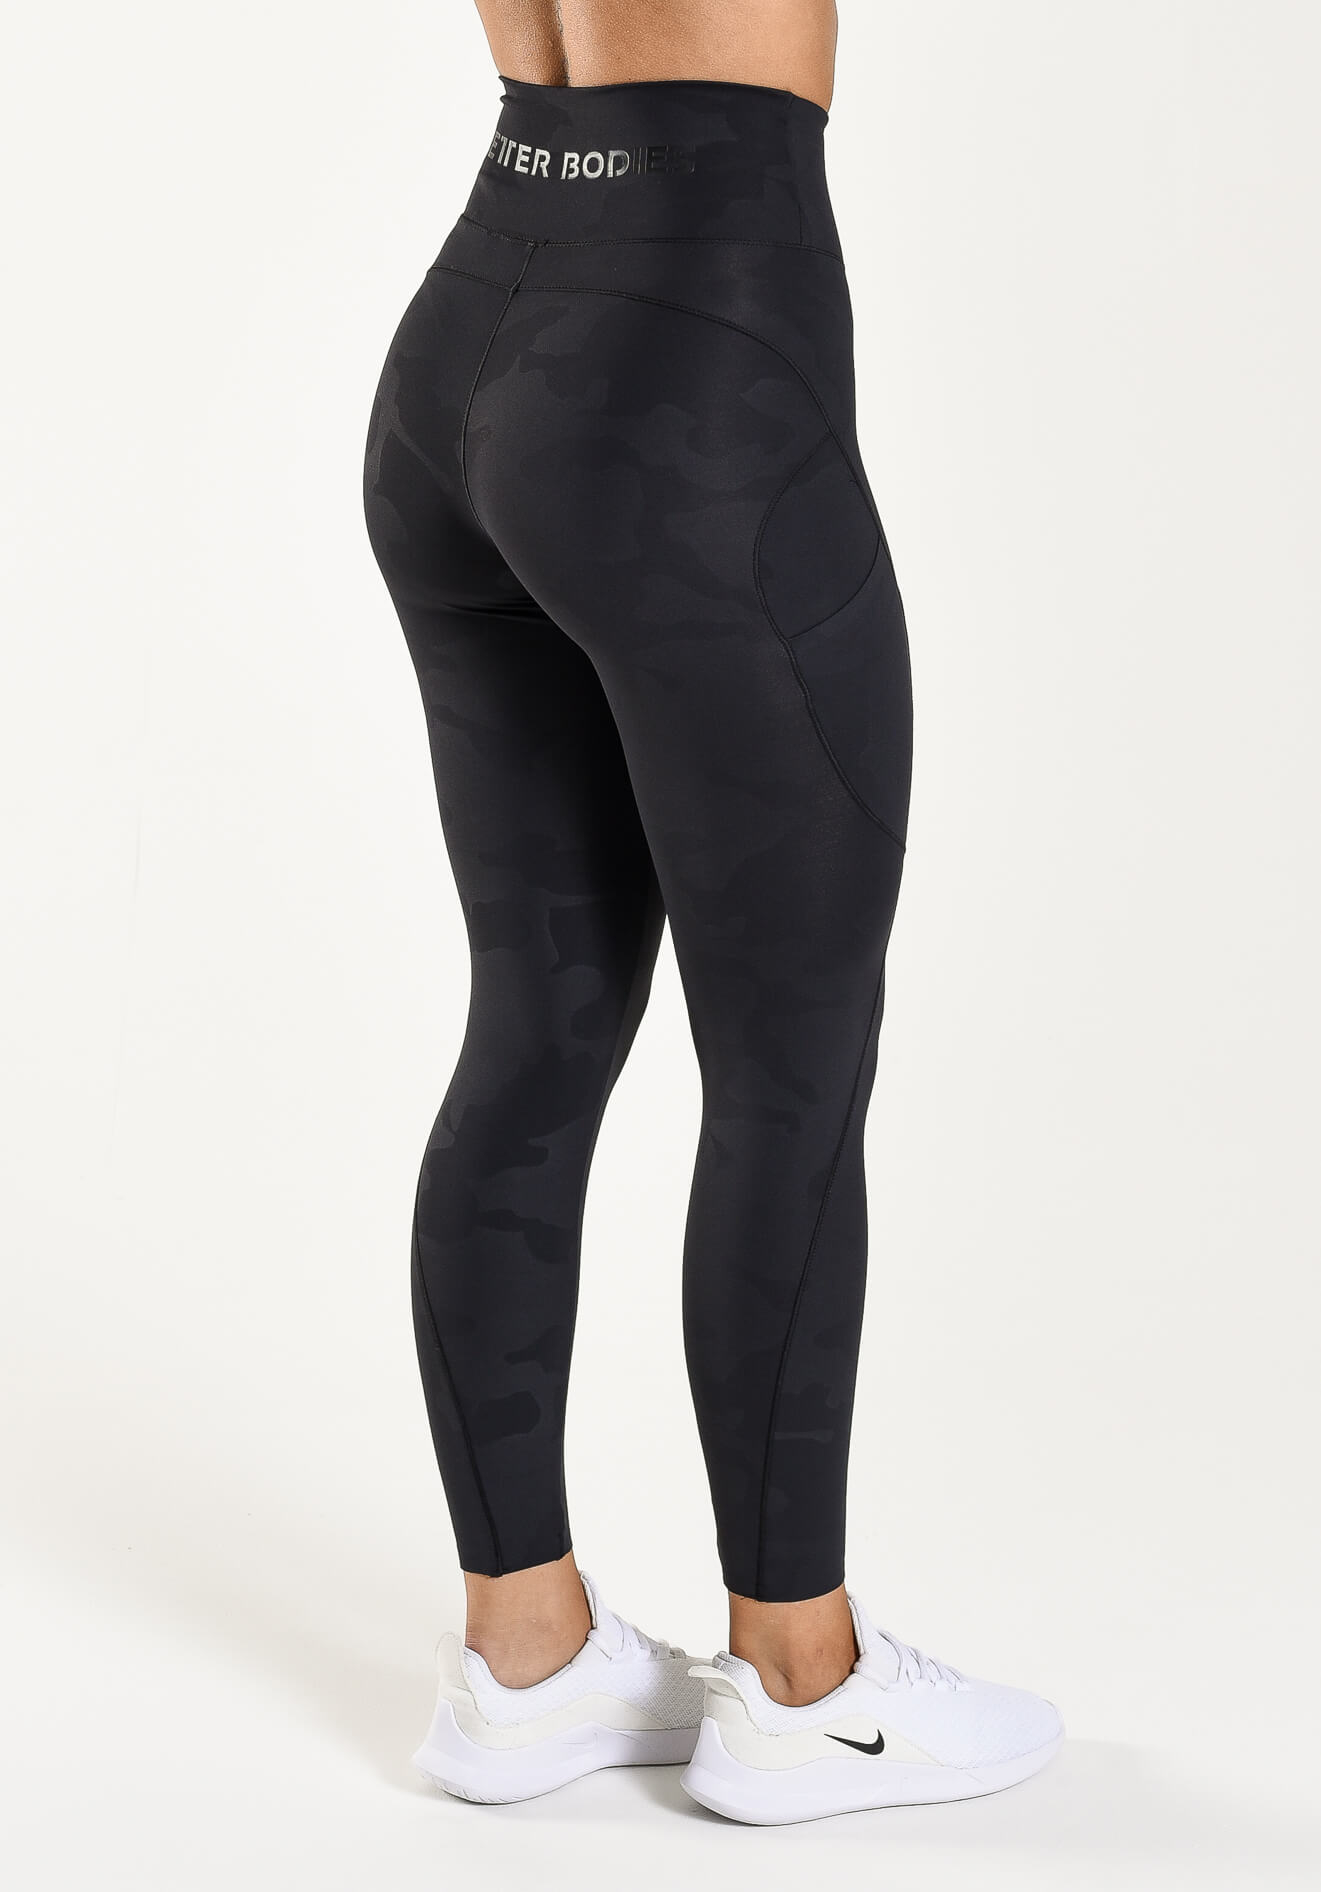 Better Bodies - High Waist Tights - One More Rep